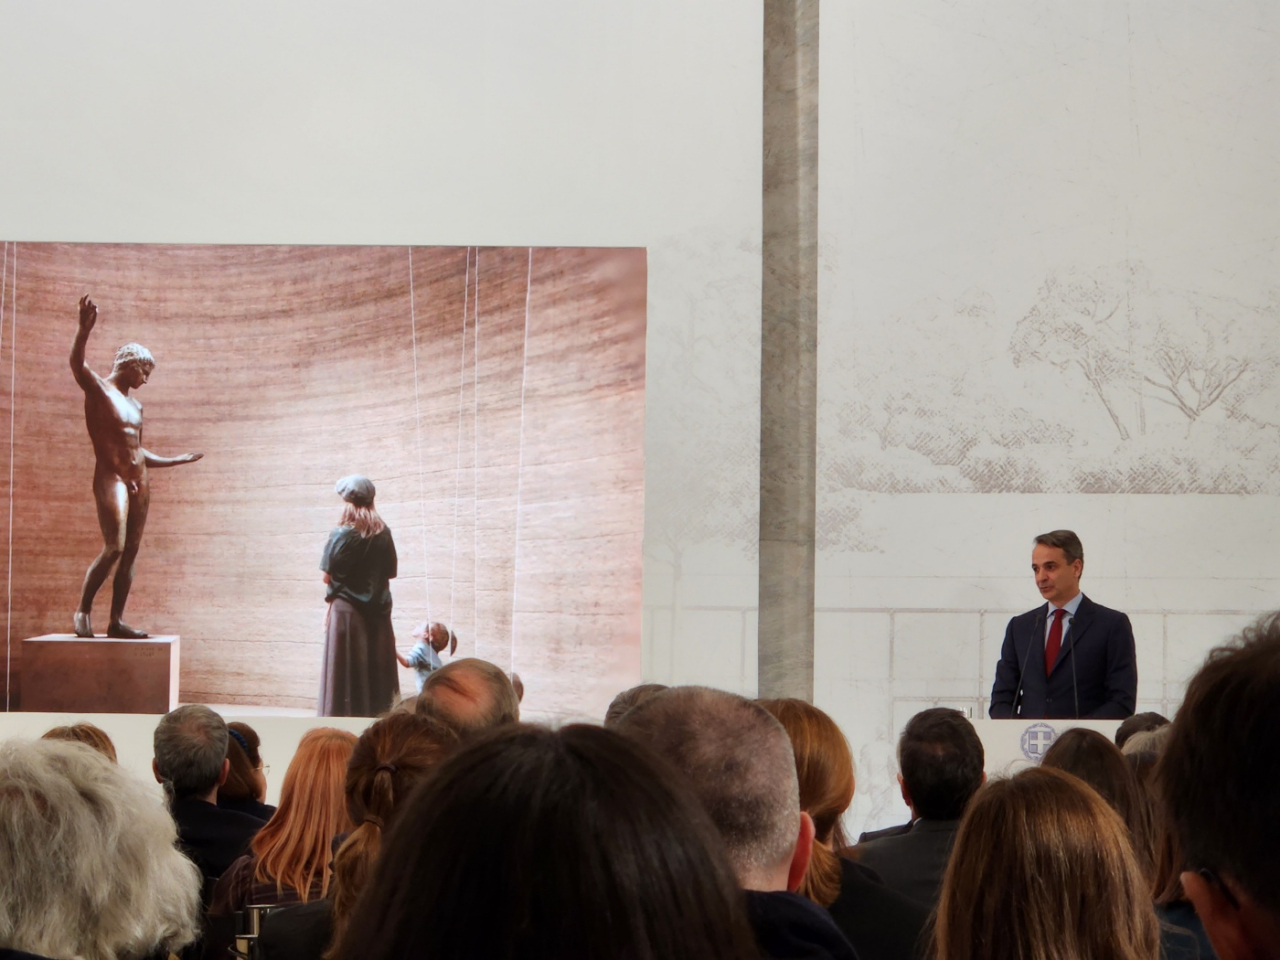 Greek Prime Minister Kyriakos Mitsotakis speaks at the presentation of the new museum extension at the National Archaeological Museum in Athens, Greece, Feb. 15. (Kim Hoo-ran/The Korea Herald)